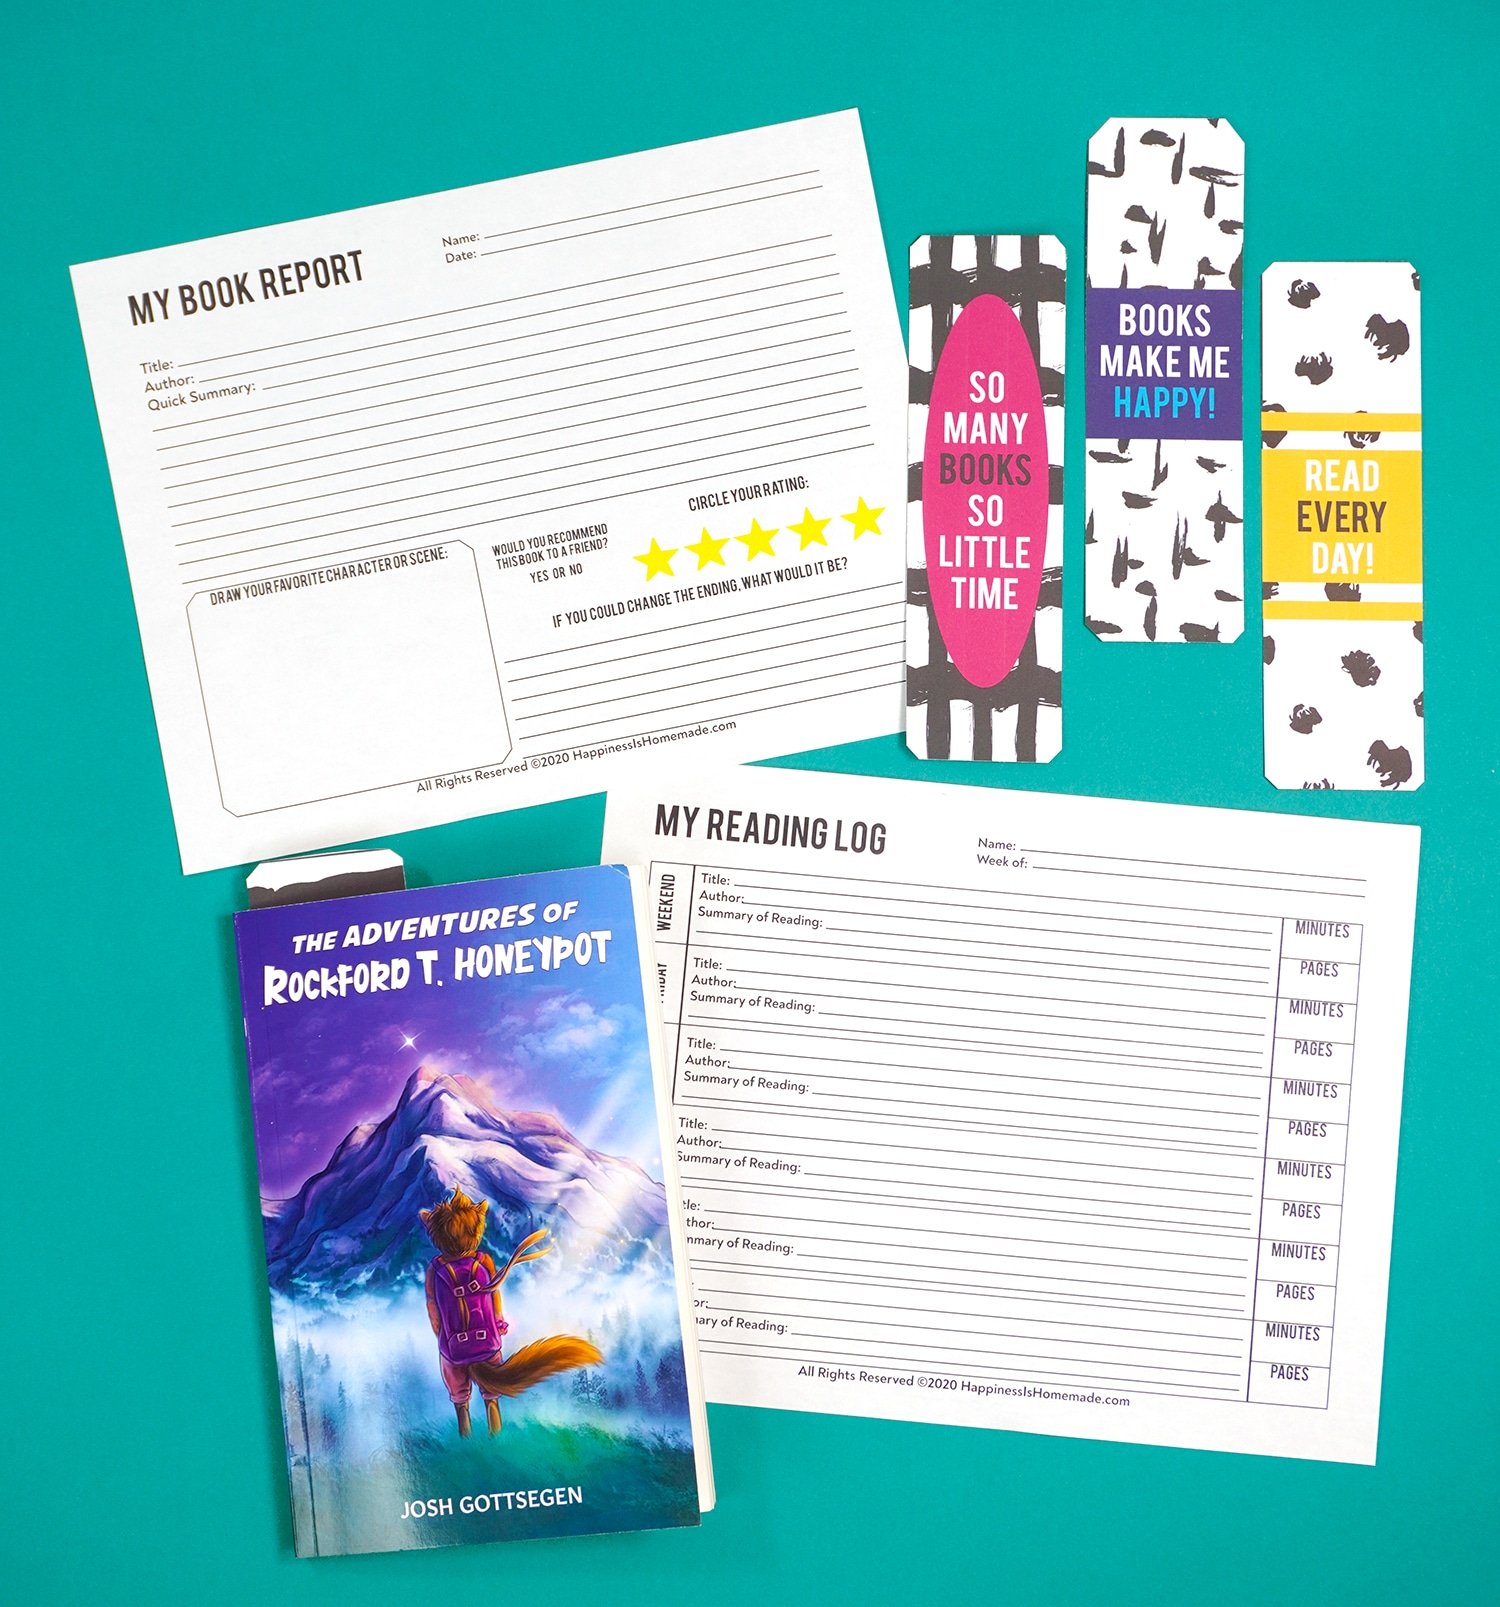 Printable reading log and book report with bookmarks and kids book on teal background